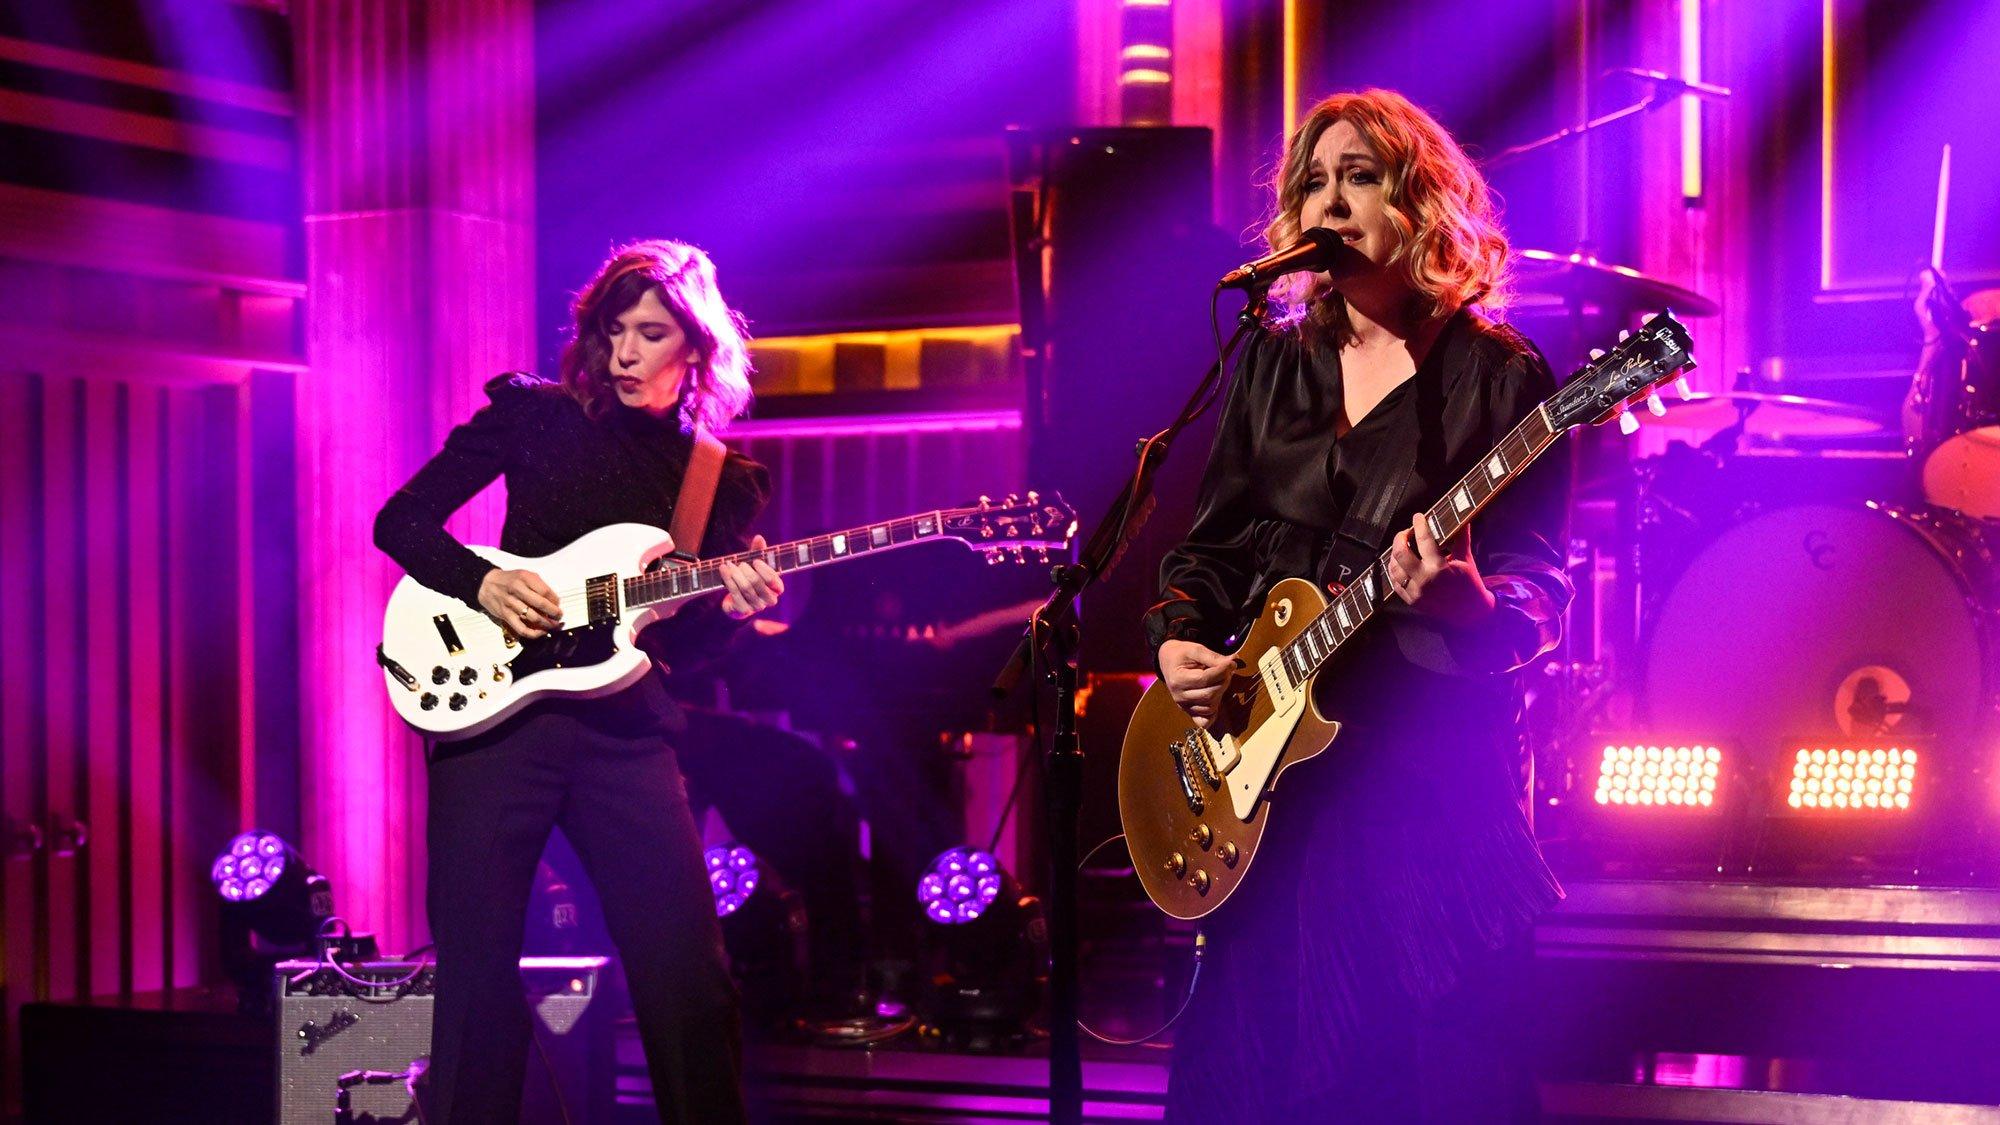 Sleater-Kinney's Carrie Brownstein and Corin Tucker play instruments and sing under red lights during a performance on the set of the Jimmy Fallon Show.